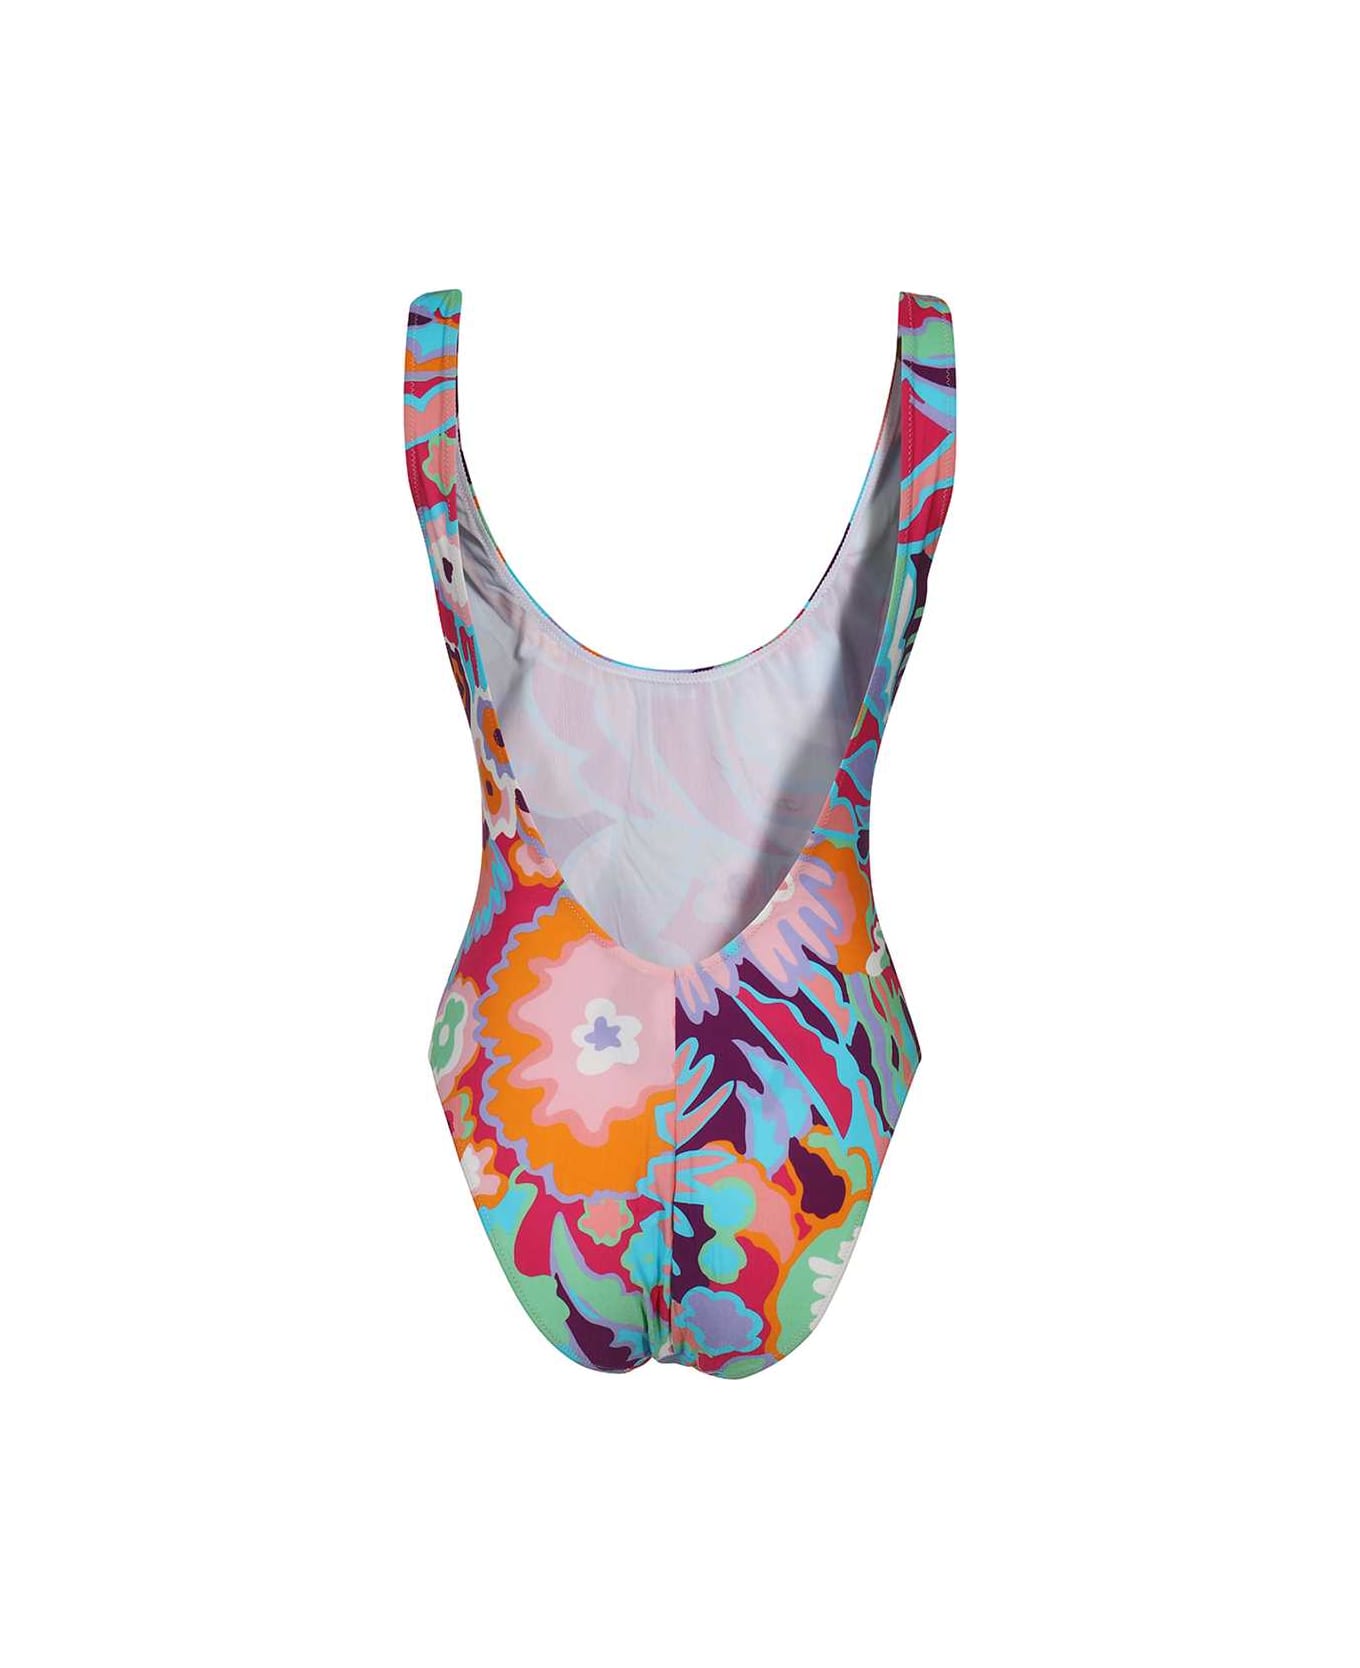 Dolce & Gabbana Printed One-piece Swimsuit - Multicolor